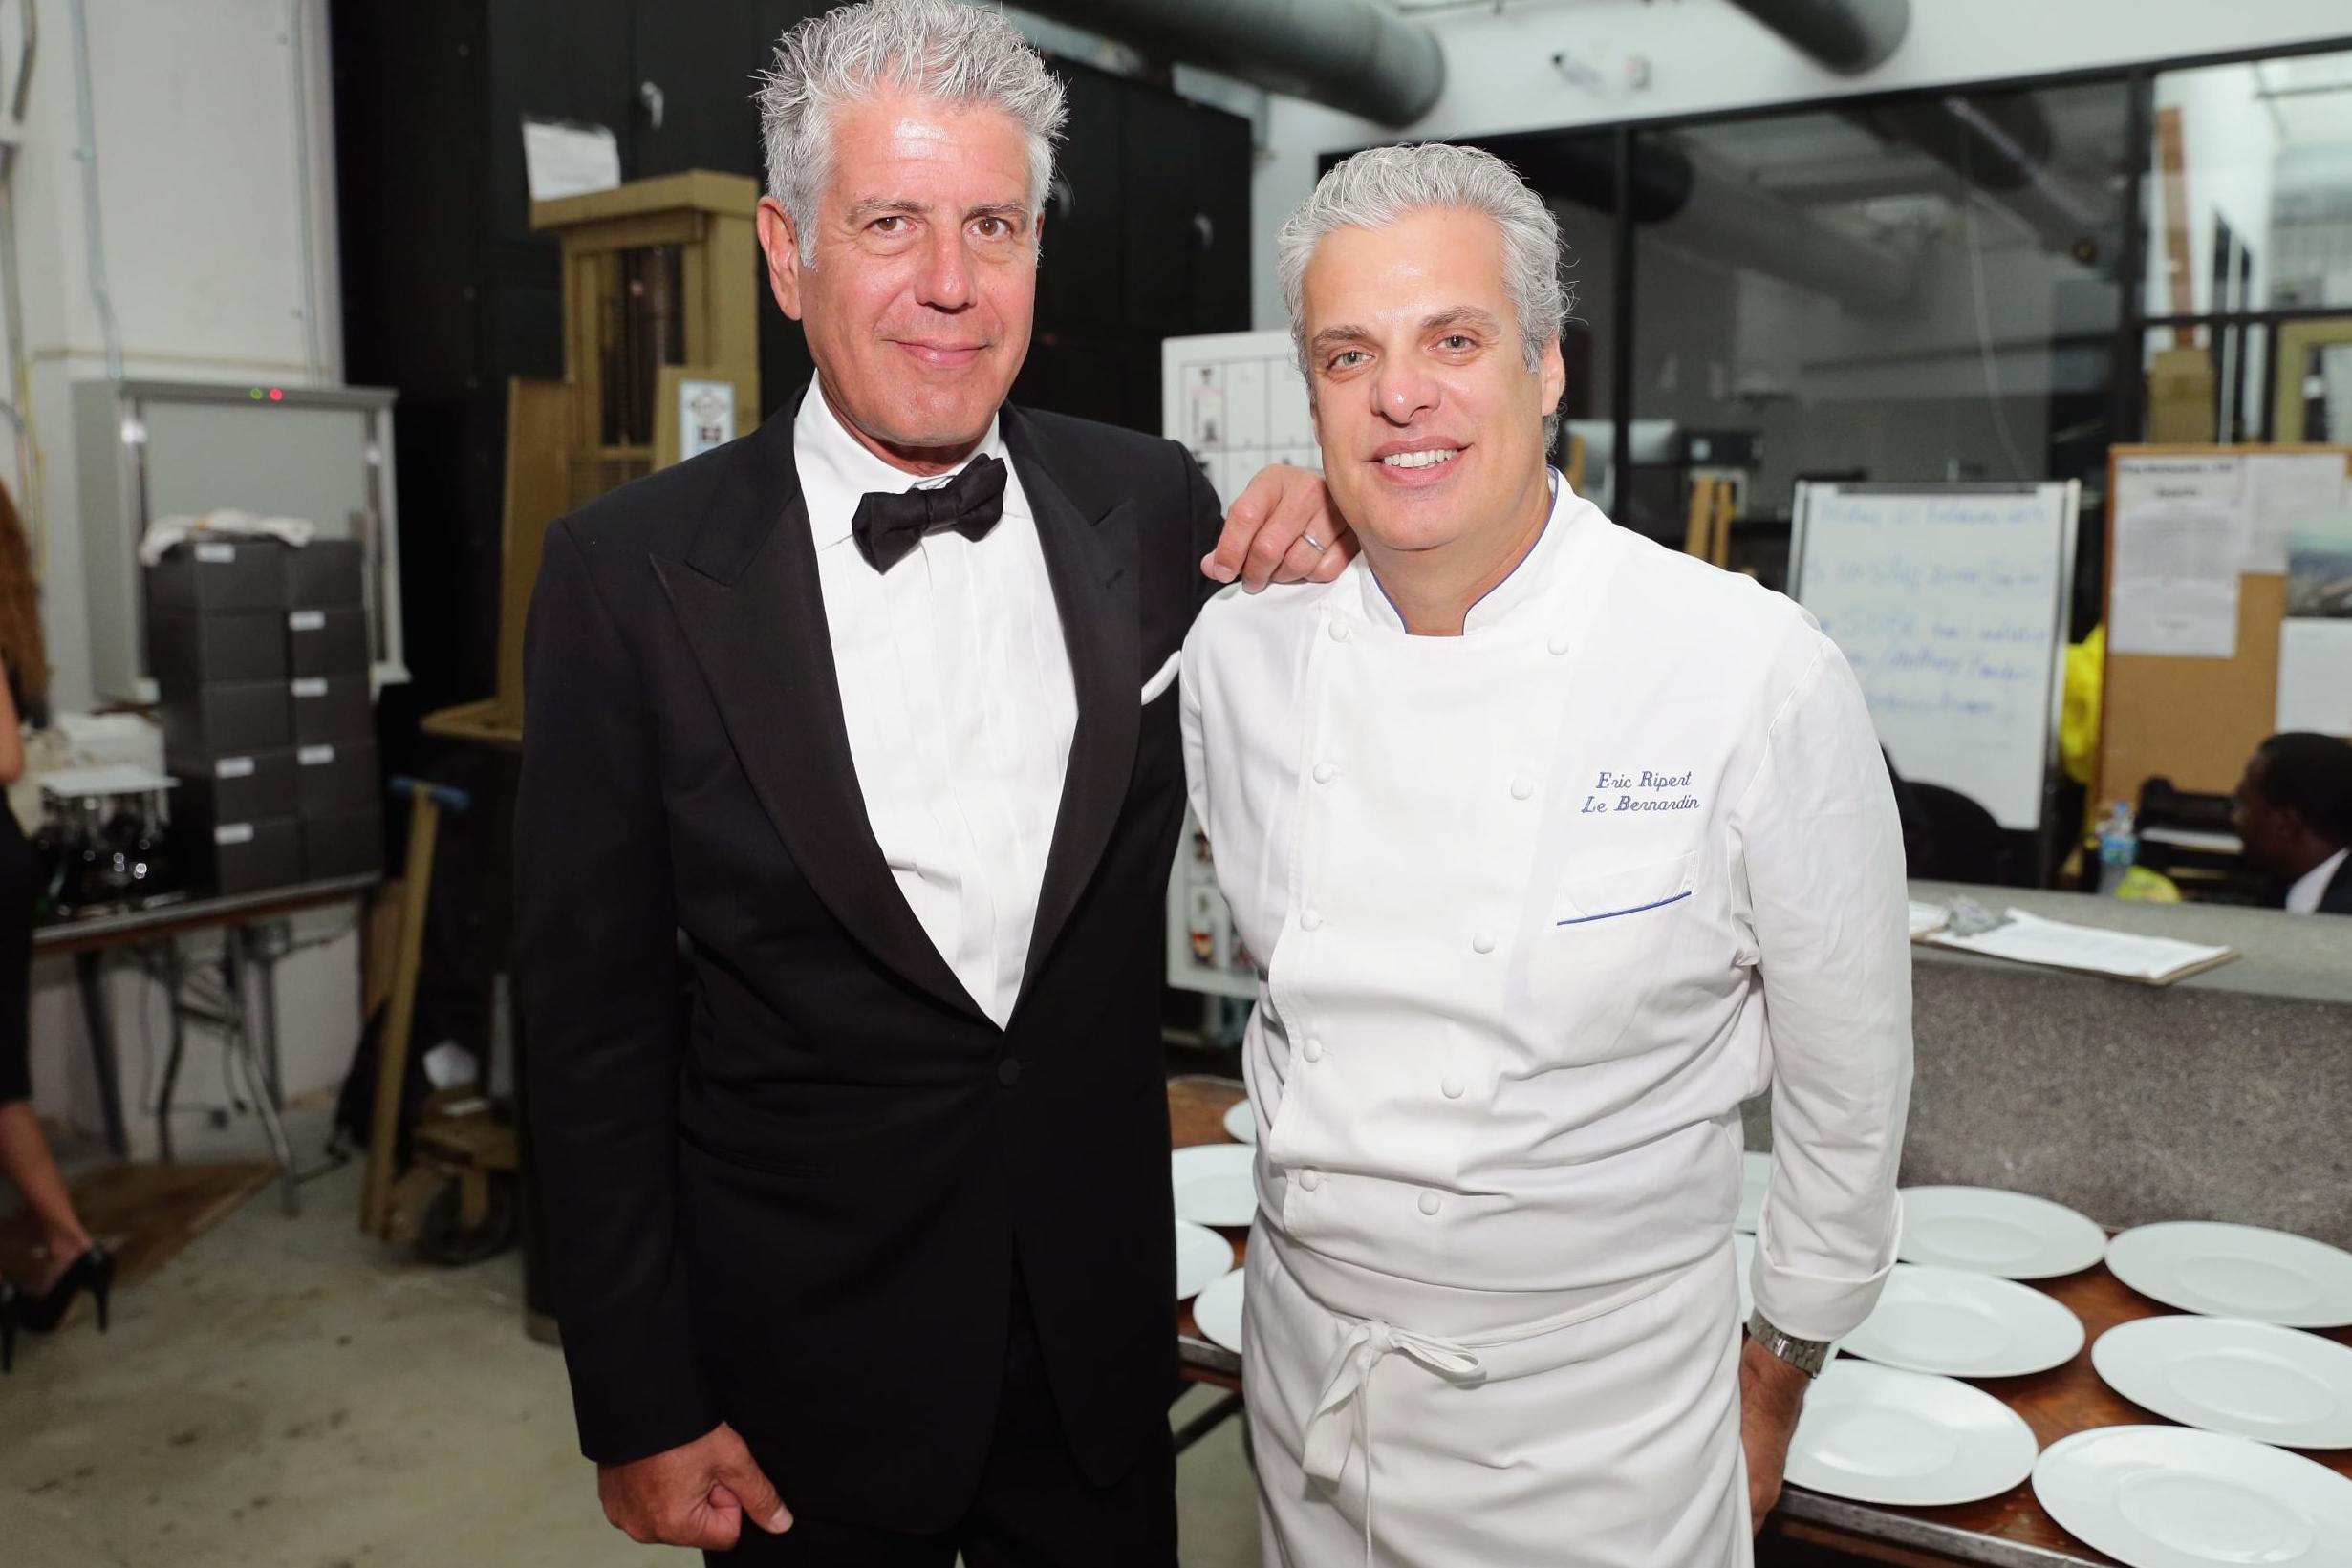 Chefs Anthony Bourdain (left) and Eric Ripert attend Ocean Liner dinner hosted by Anthony Bourdain, Frederic Morin, David McMillan, Andrew Carmellini, Eric Ripert, Daniel Boulud and Francois Payard during the Food Network South Beach Wine &amp; Food Festival at Wolfsonian on 21 February, 2014 in Miami Beach, Florida. (Photo by Neilson Barnard/Getty Images for Food Network SoBe Wine &amp; Food Festival)